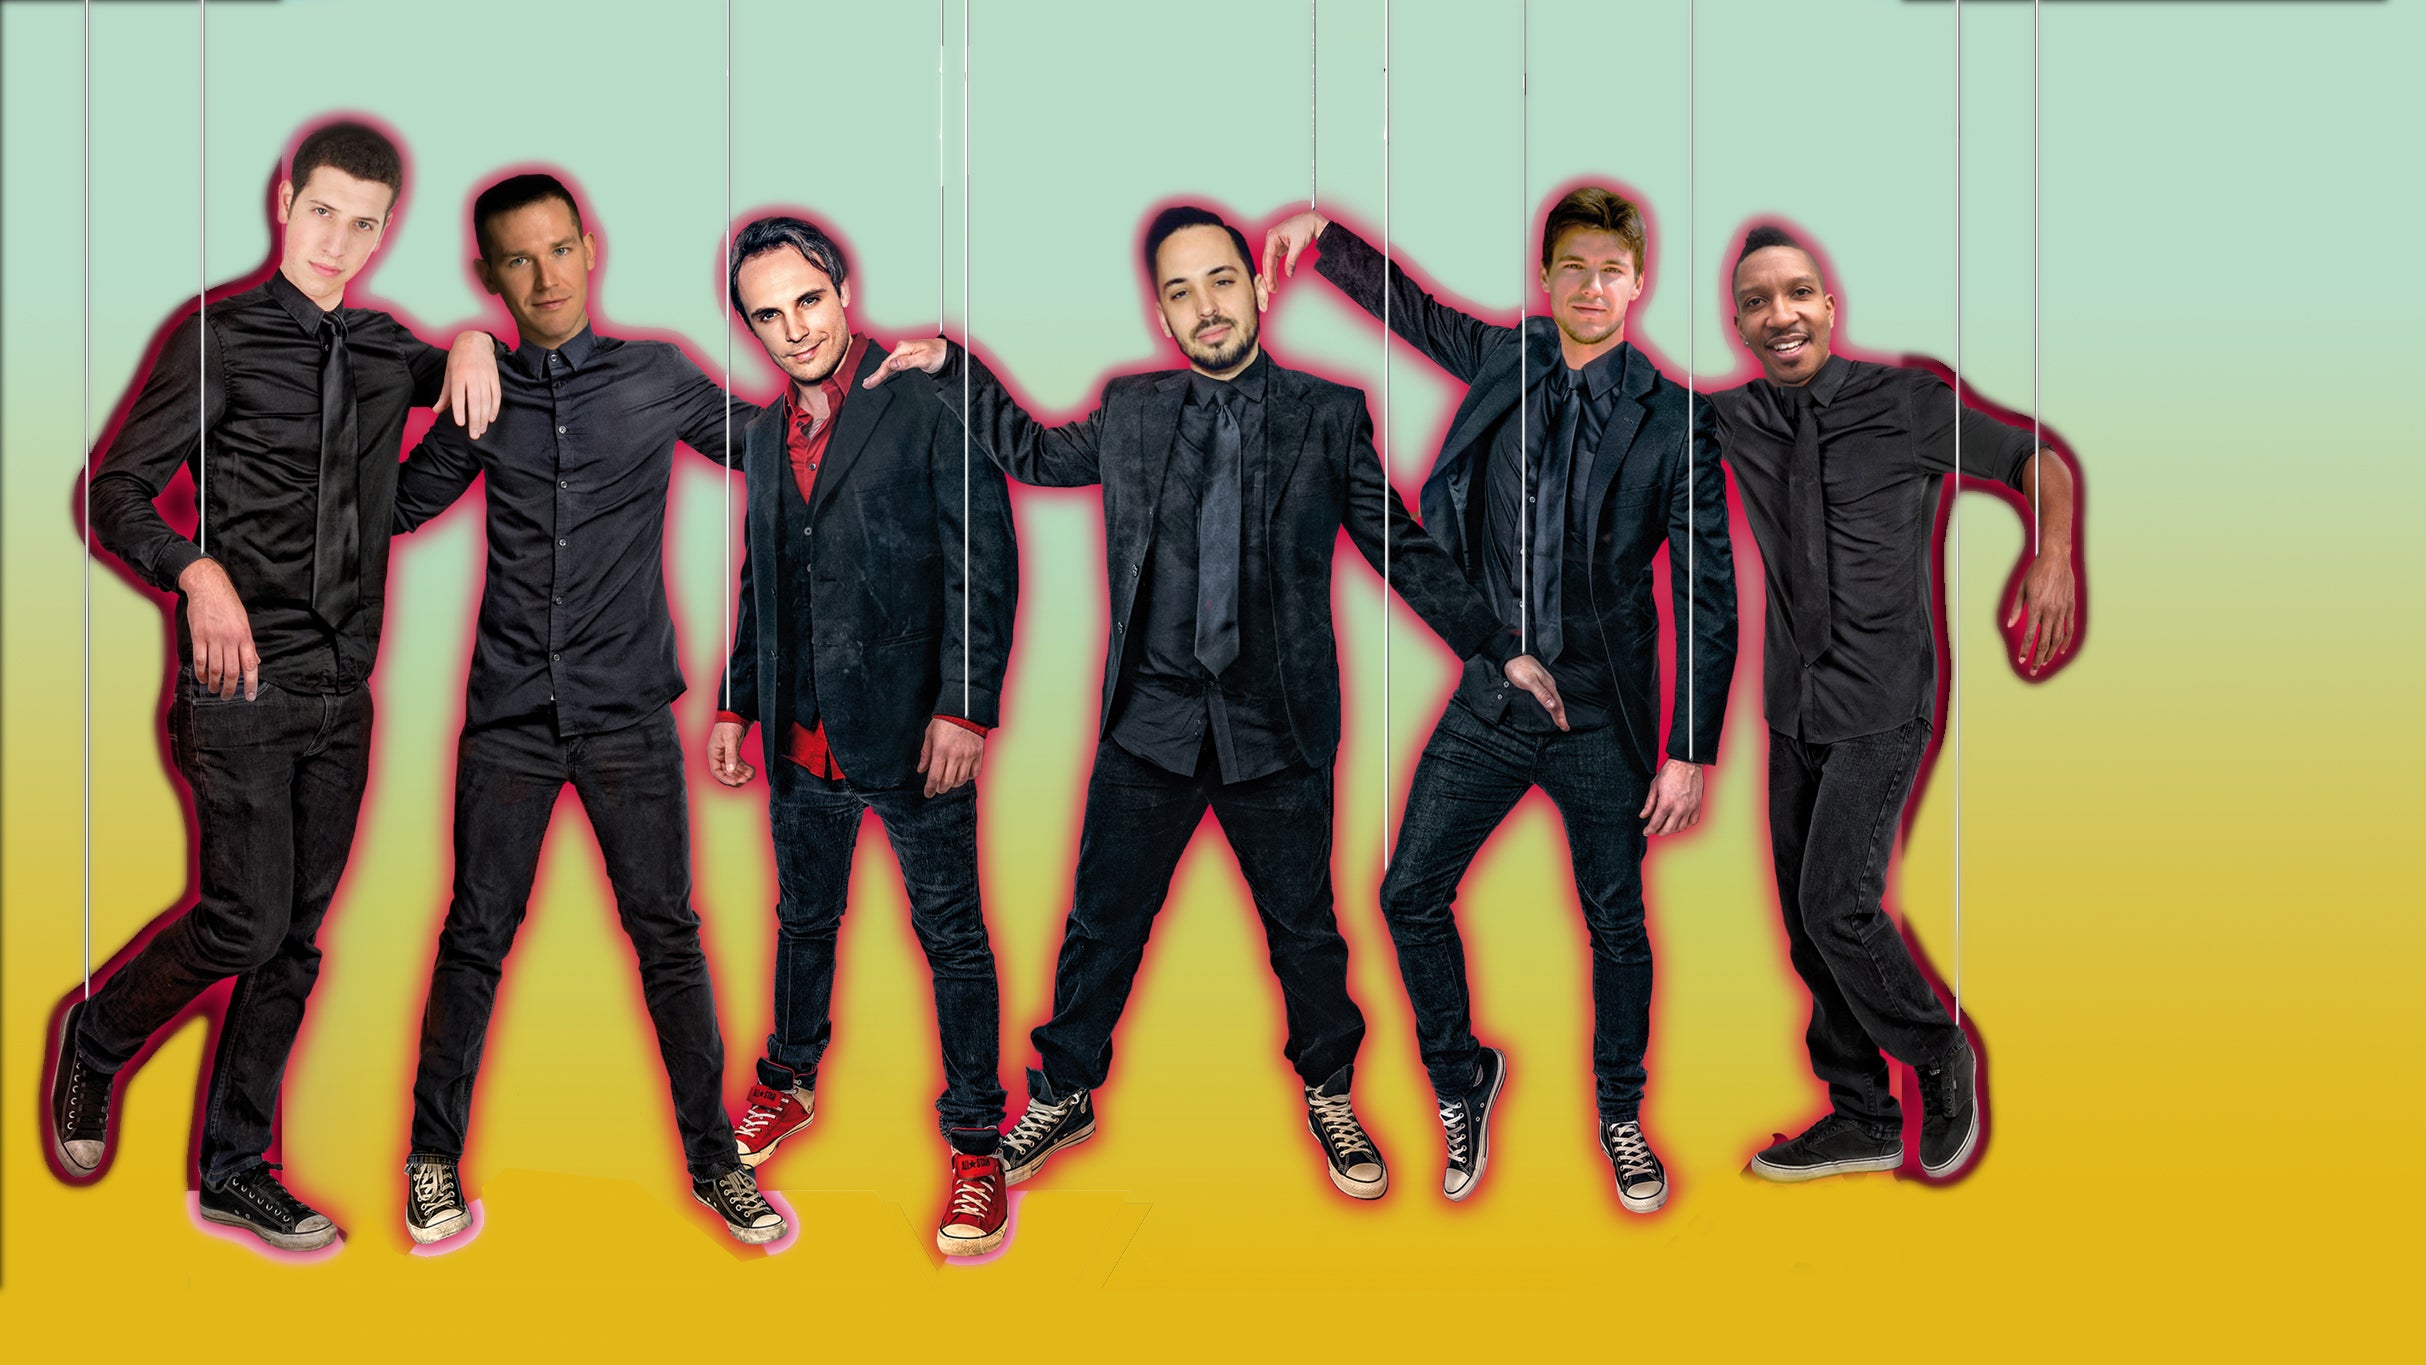 Boy Band Review: The Ultimate Boy Band Tribute!